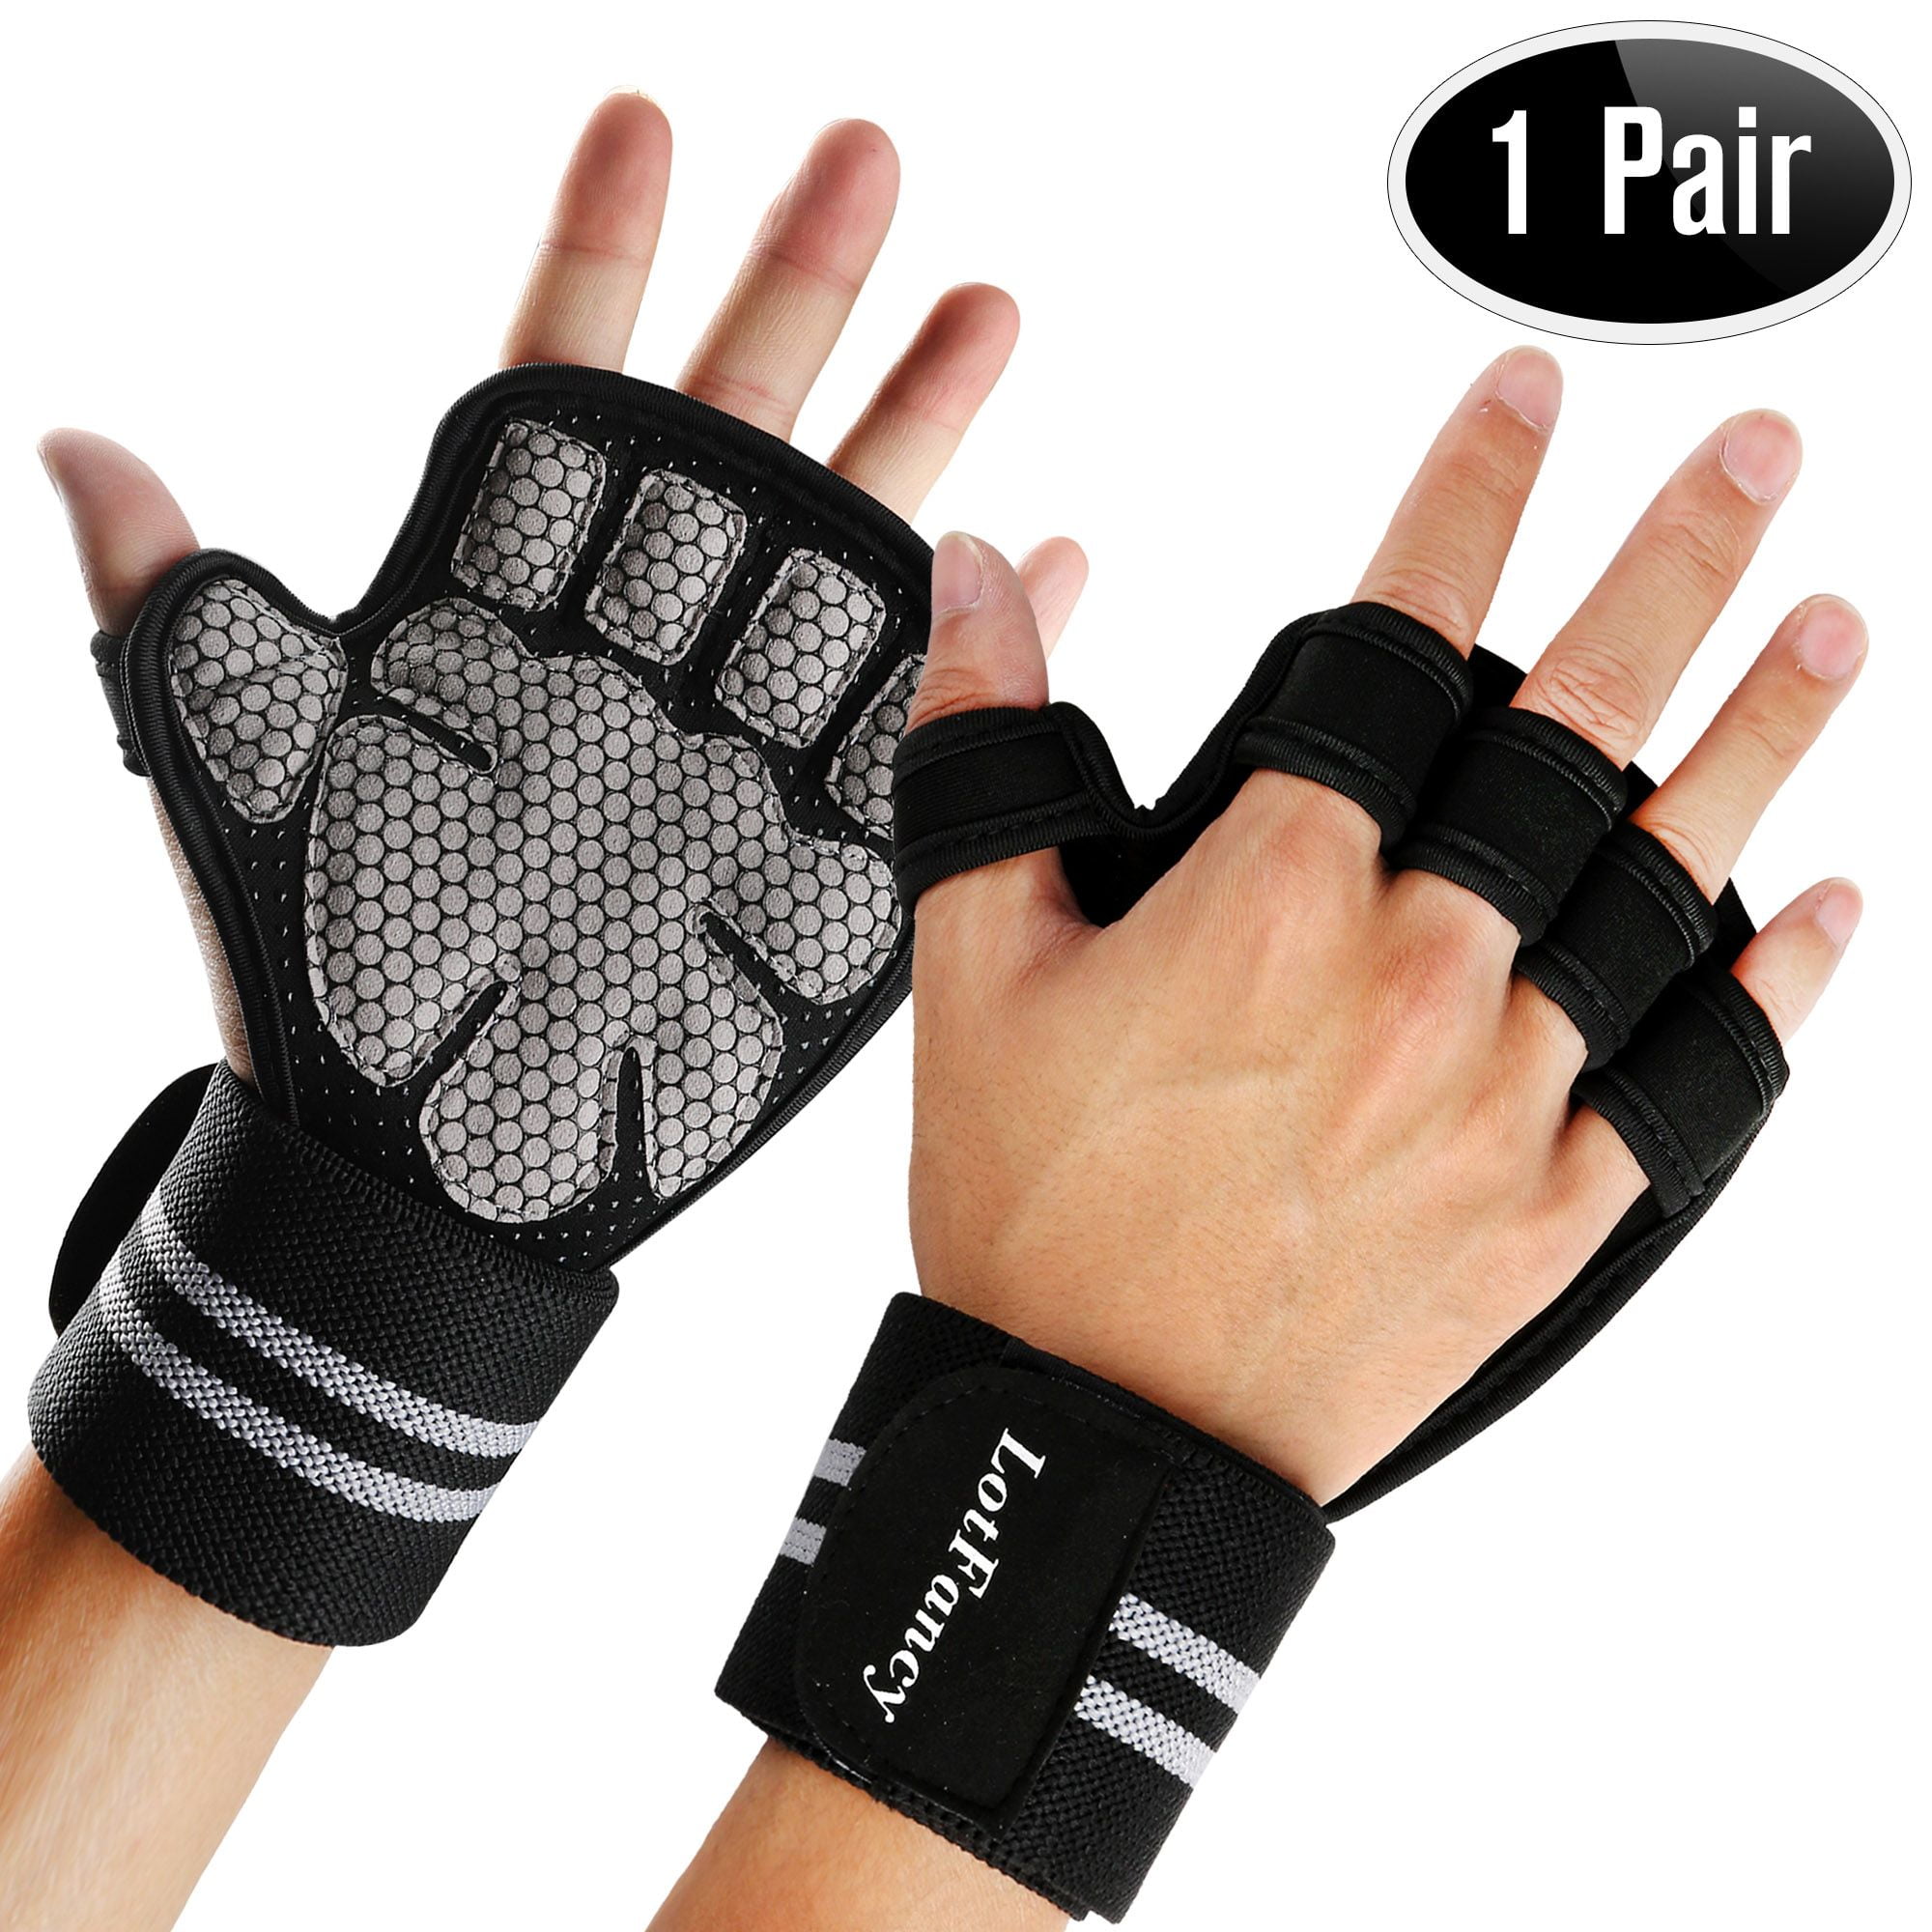 Deadlifts and Bench Press Tsuinz Gym Fitness Gloves for Men and Women Pull Ups Weight Lifting Workout Exercise Wrist Support Protection Gloves Compatible for Weight Training